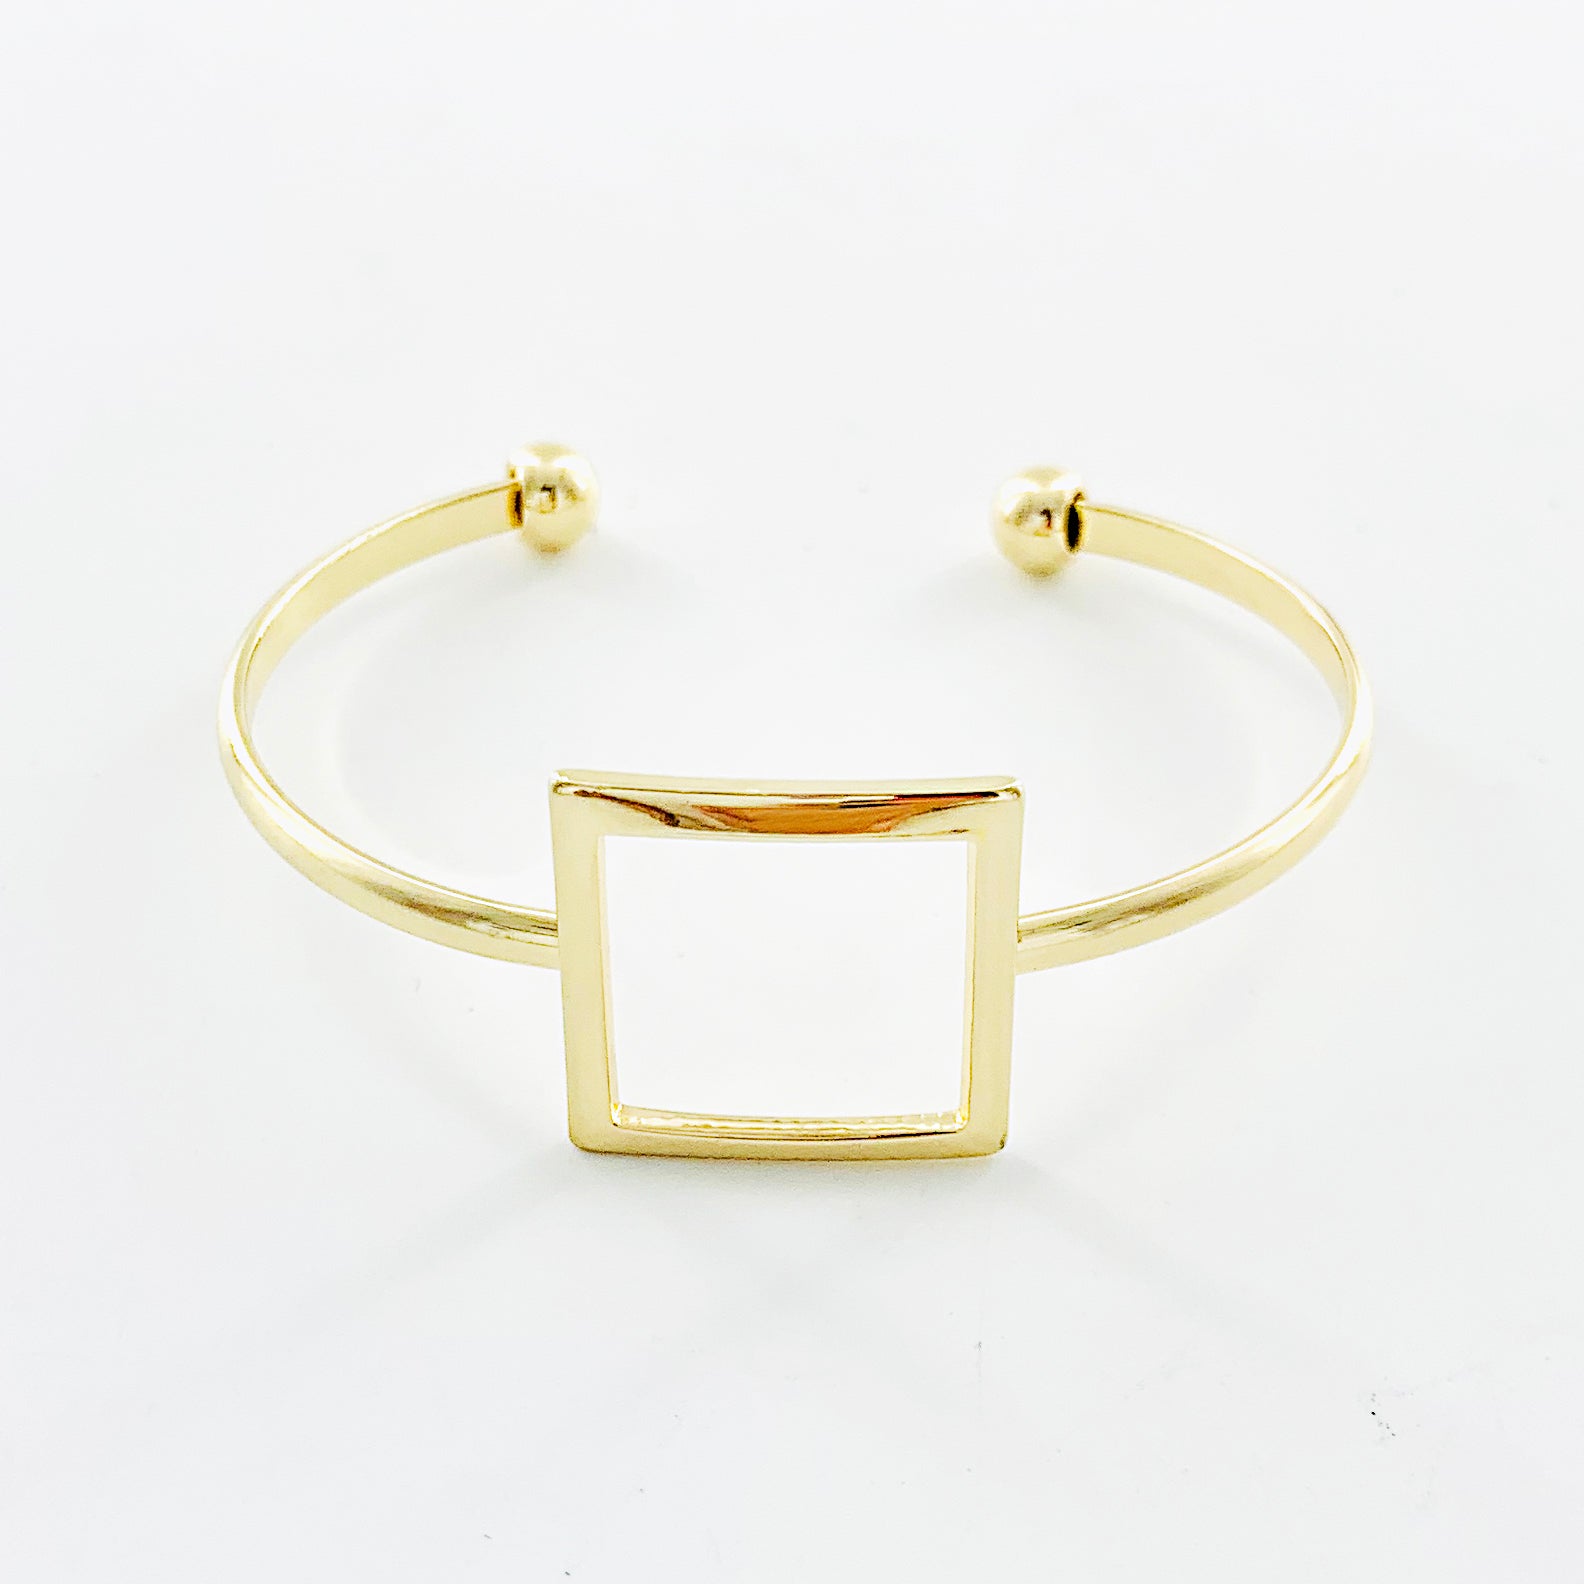 Thin gold bangles with hollow square design